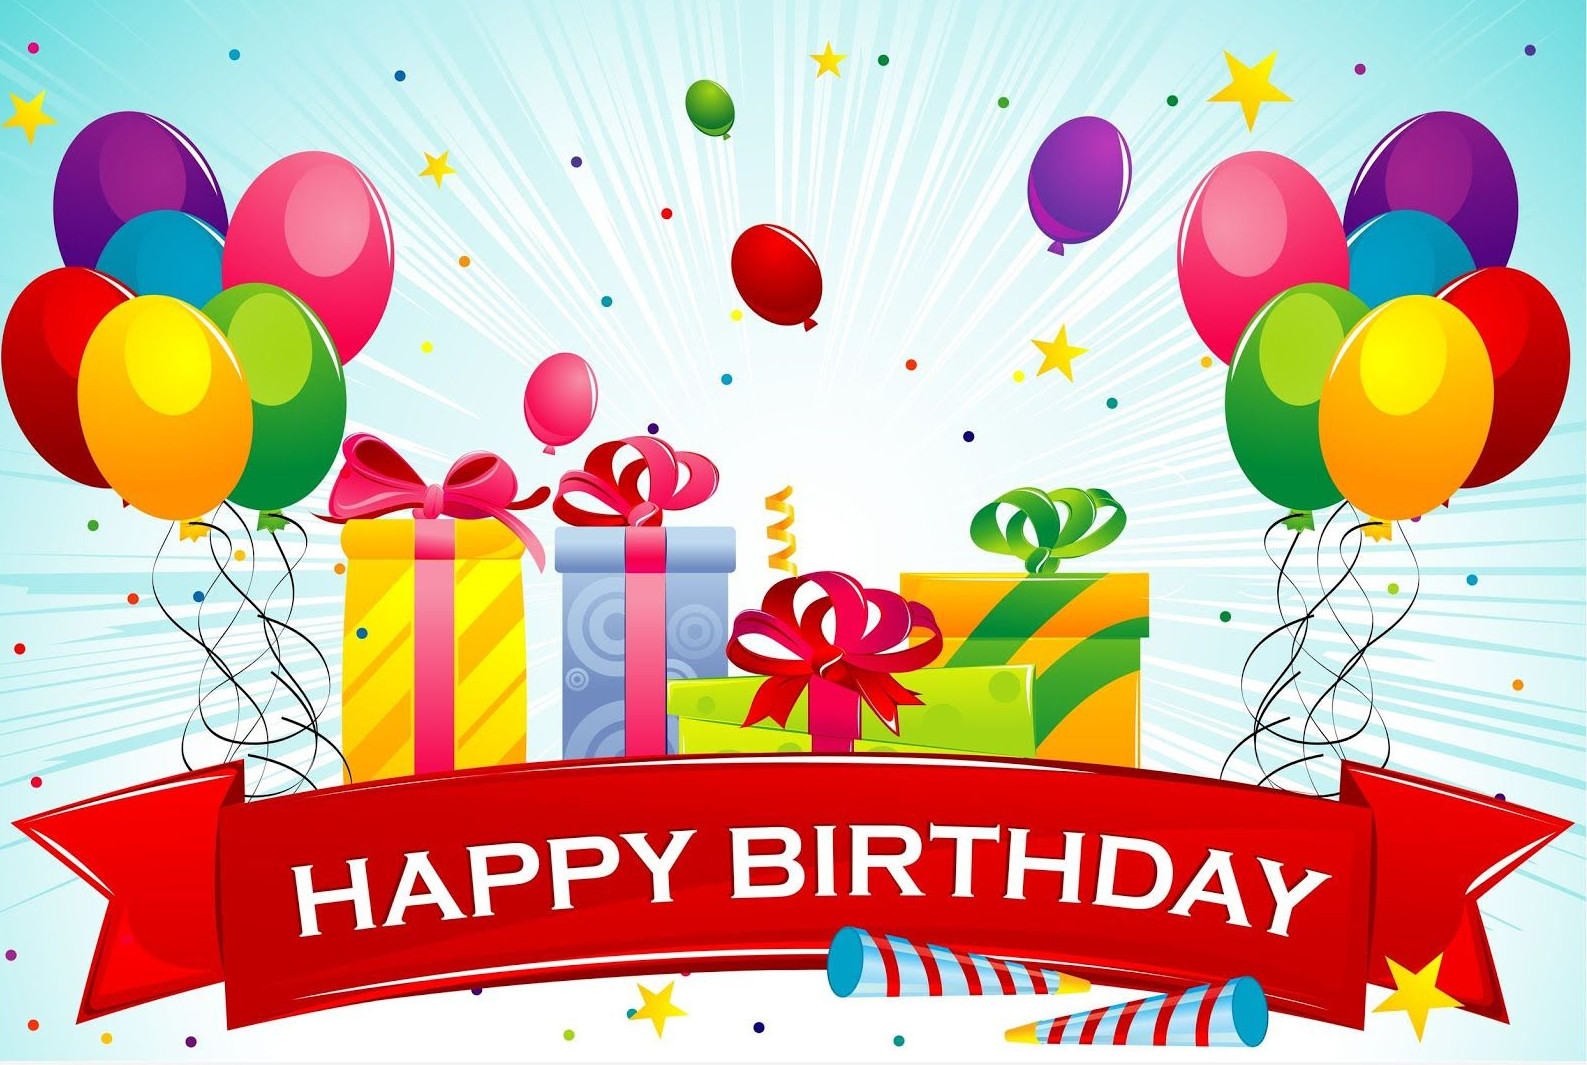 Birthday Card Free
 35 Happy Birthday Cards Free To Download – The WoW Style